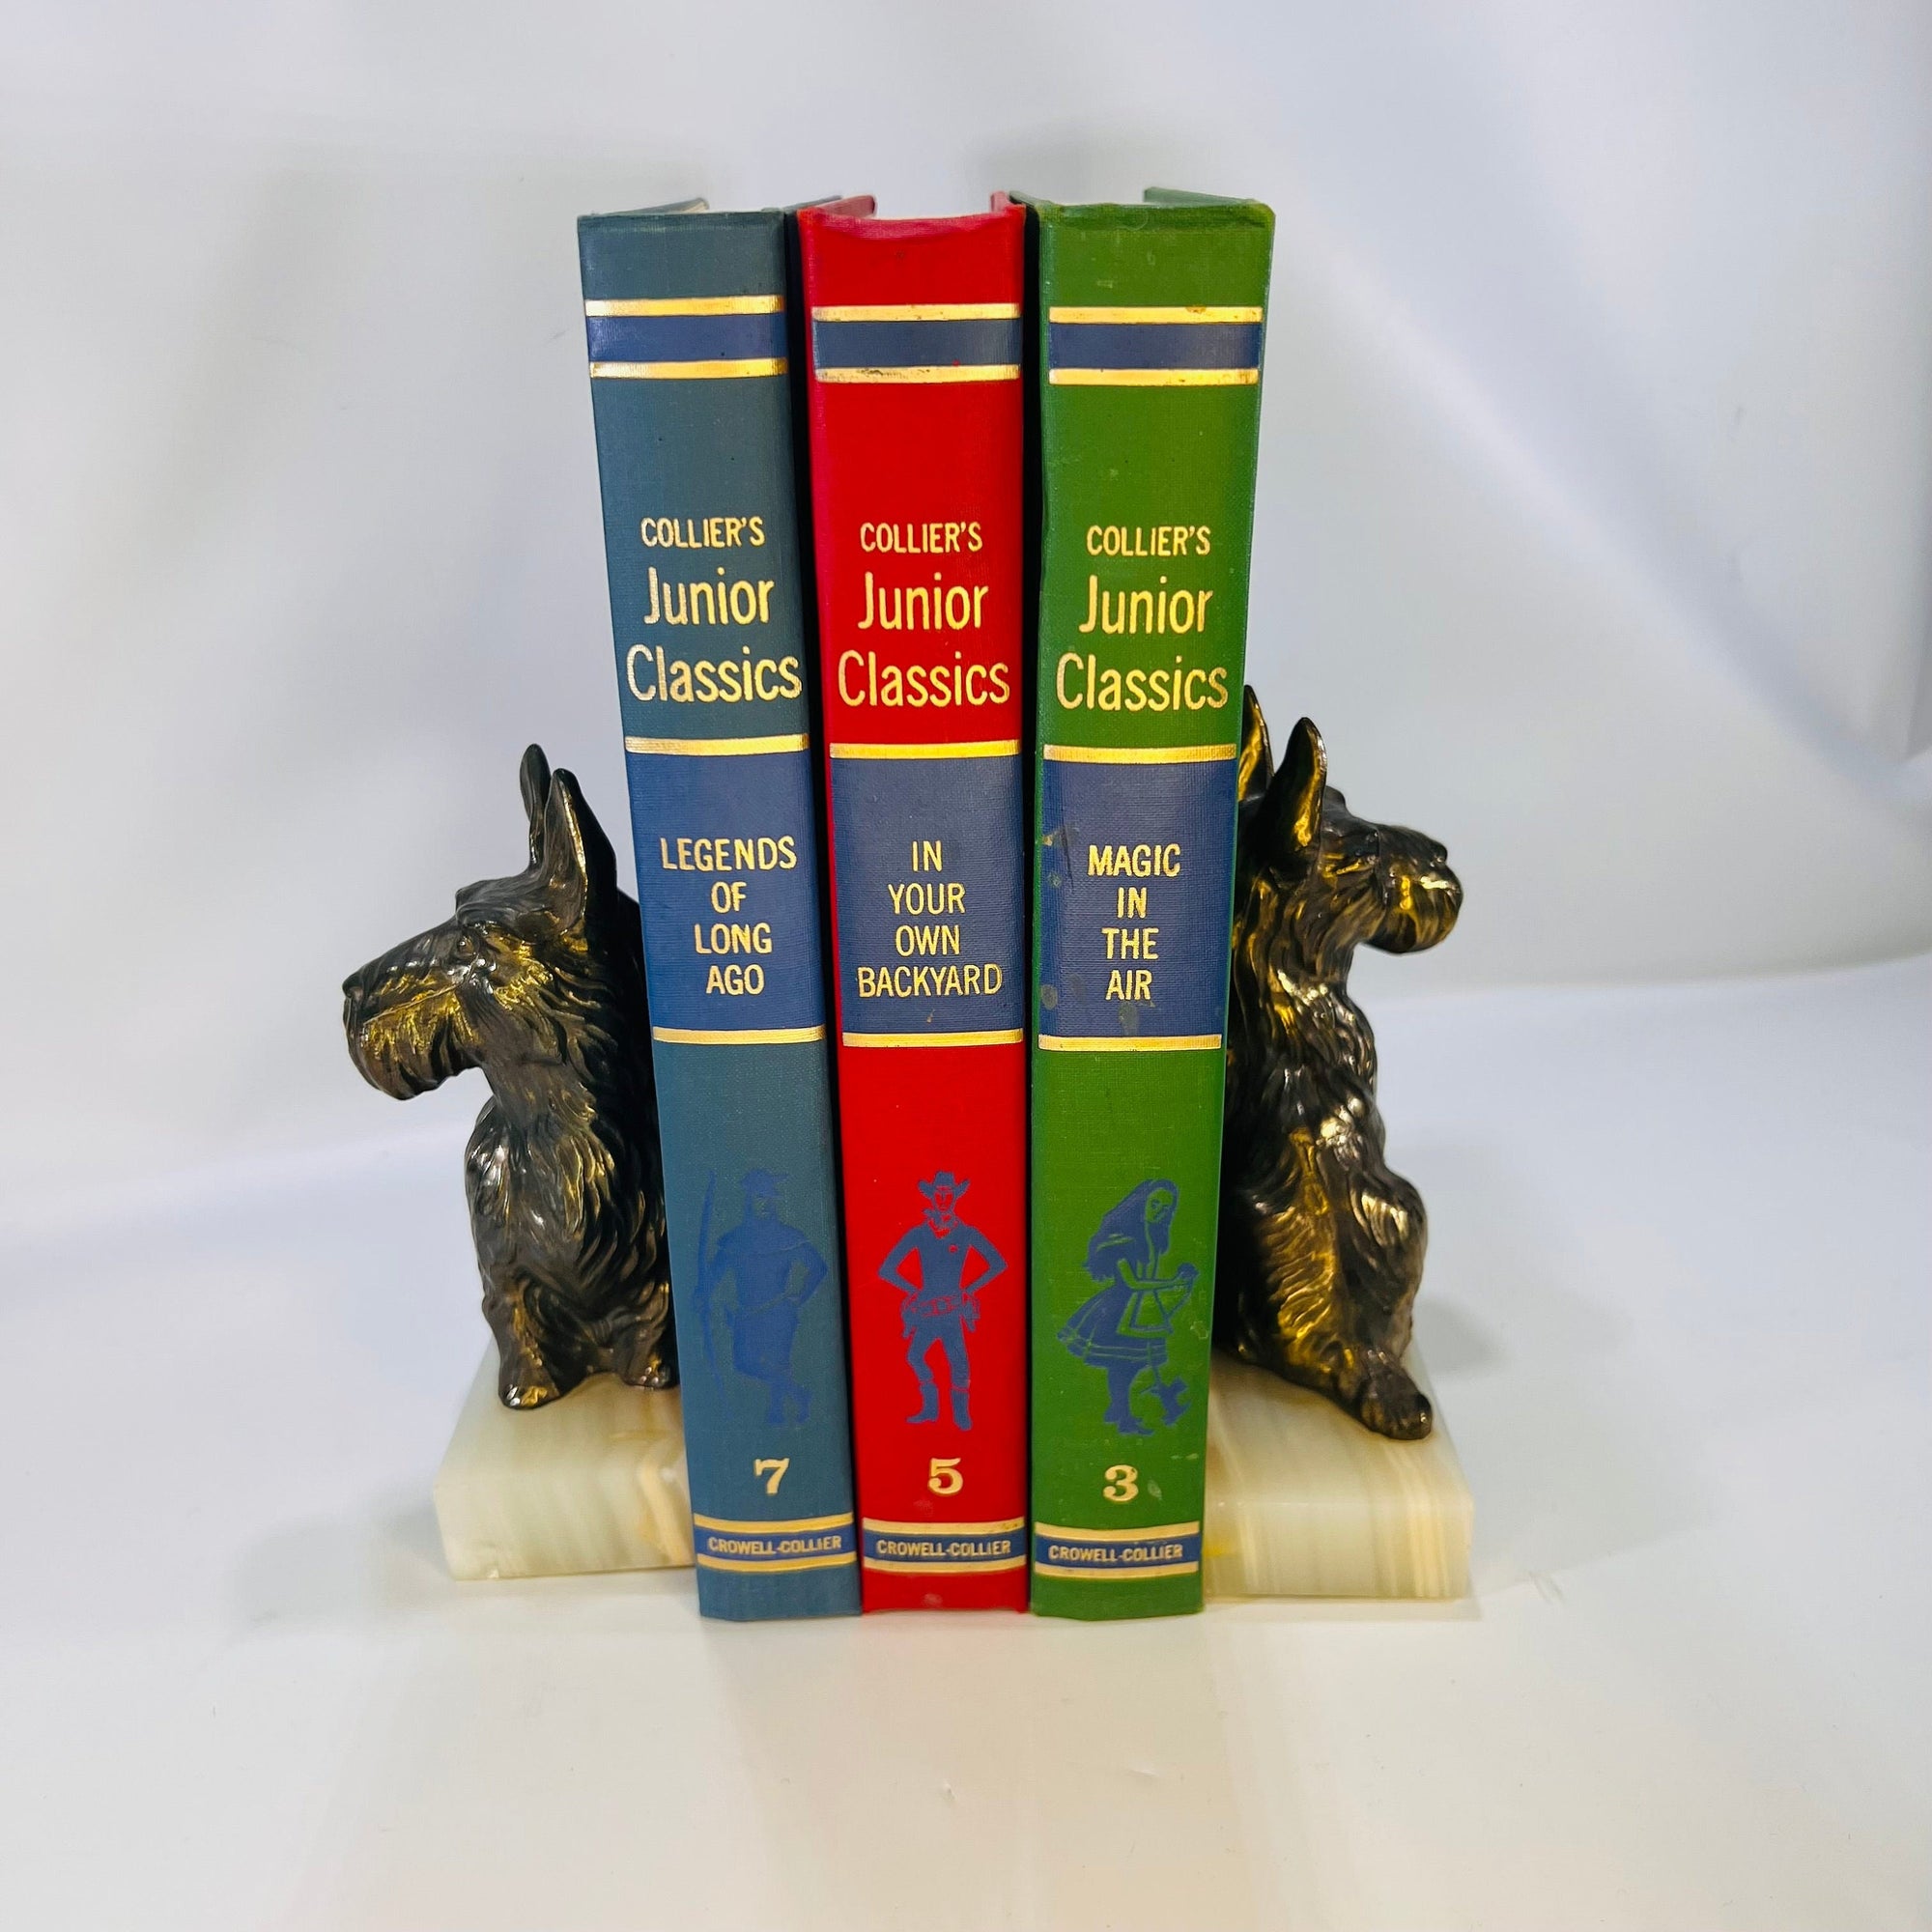 Pair of Scottish Terrier Dog Metal Bookends with Stone Base 1950s Vintage